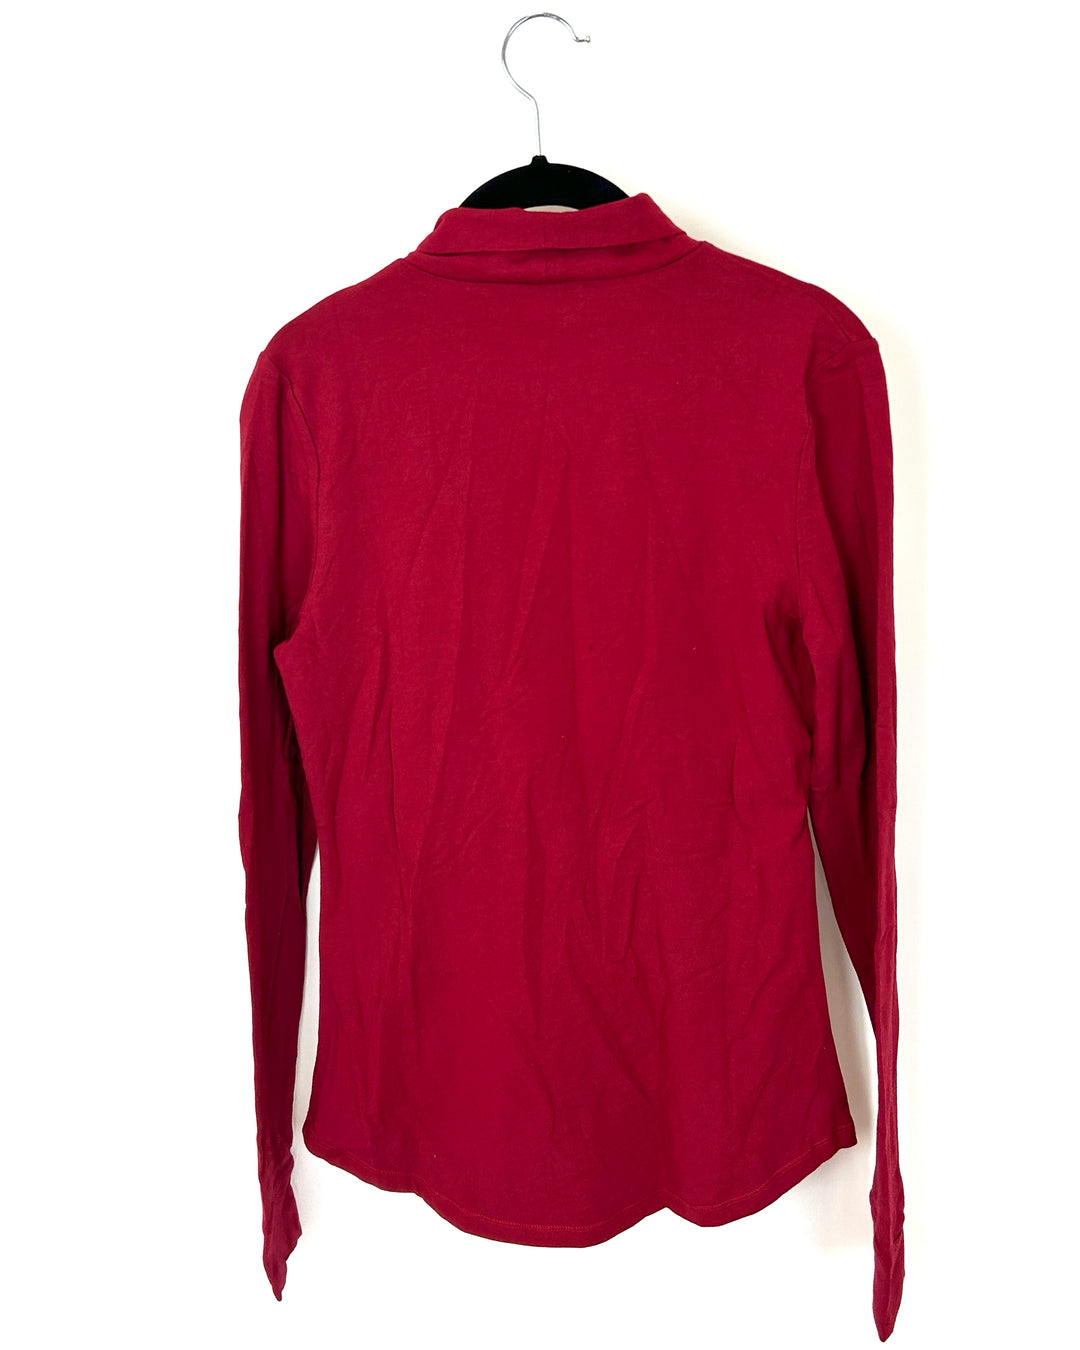 Red Long Sleeve Turtleneck Top - Size 4/6